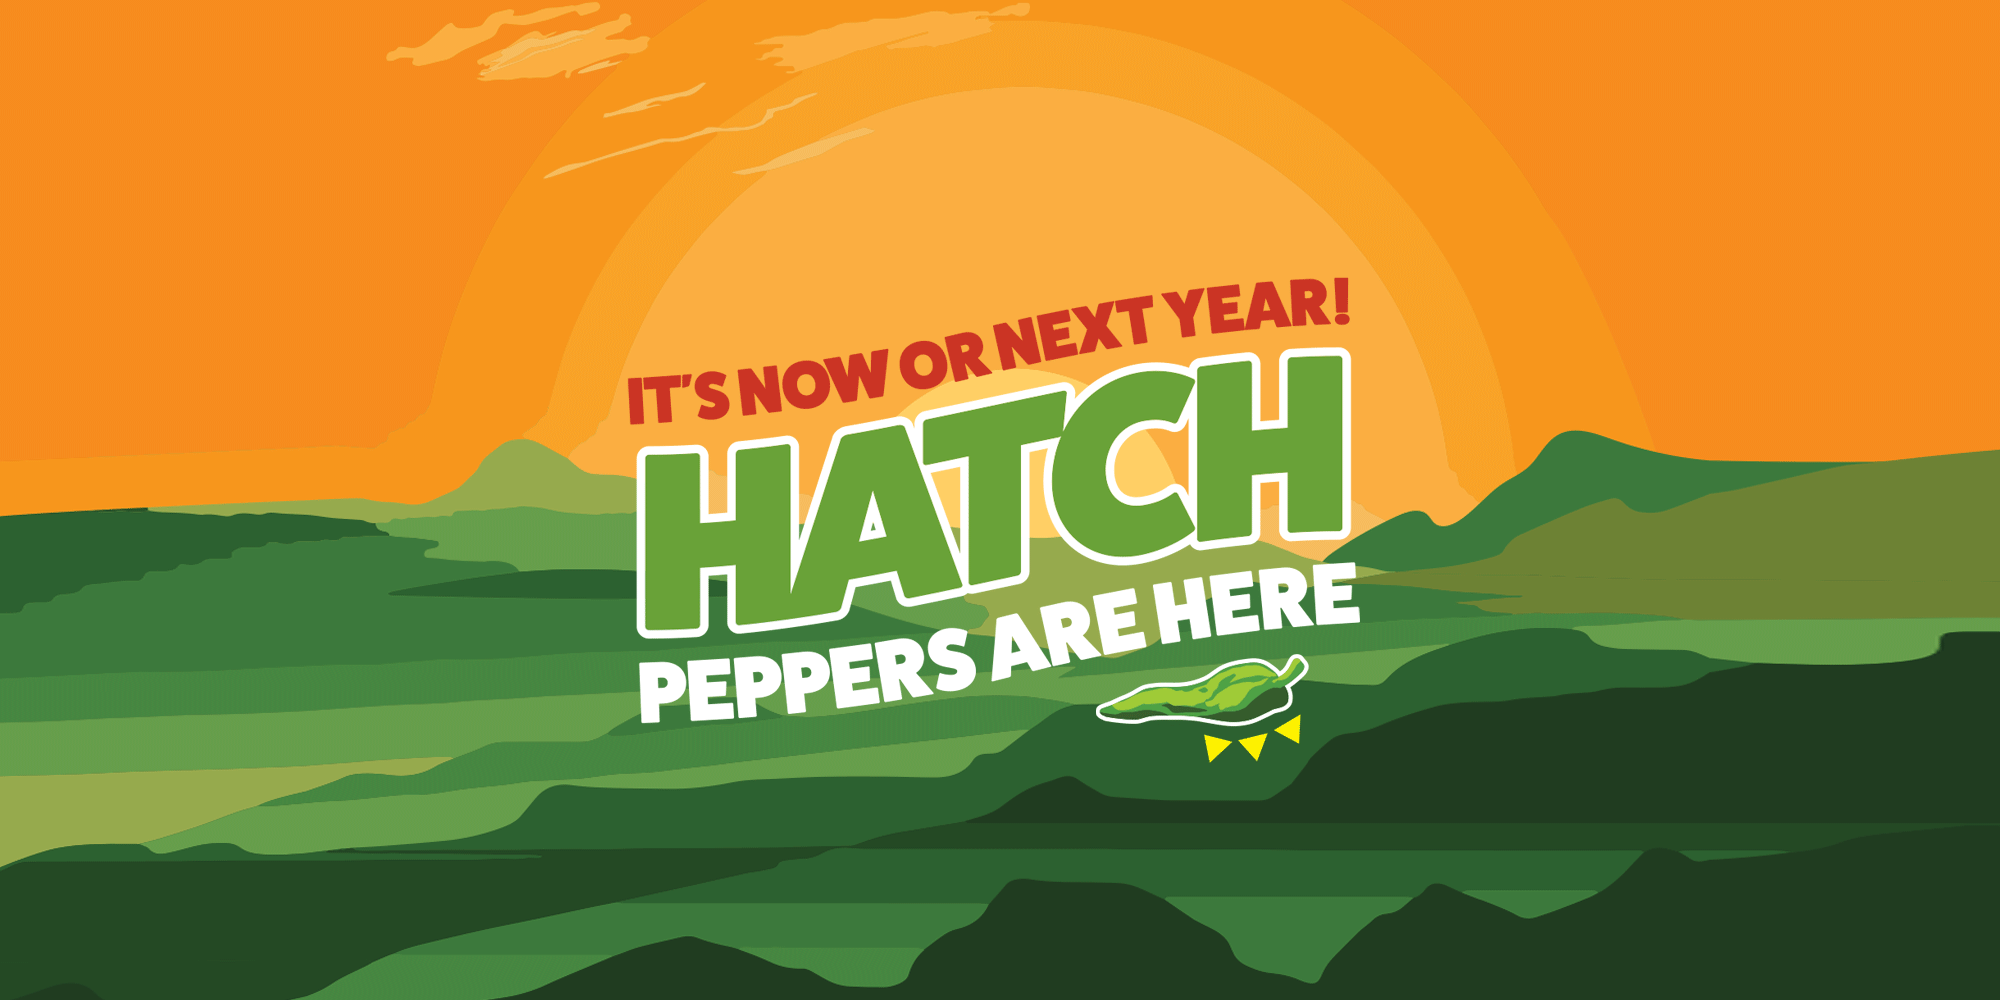 It's now or next year! Hatch Peppers are here